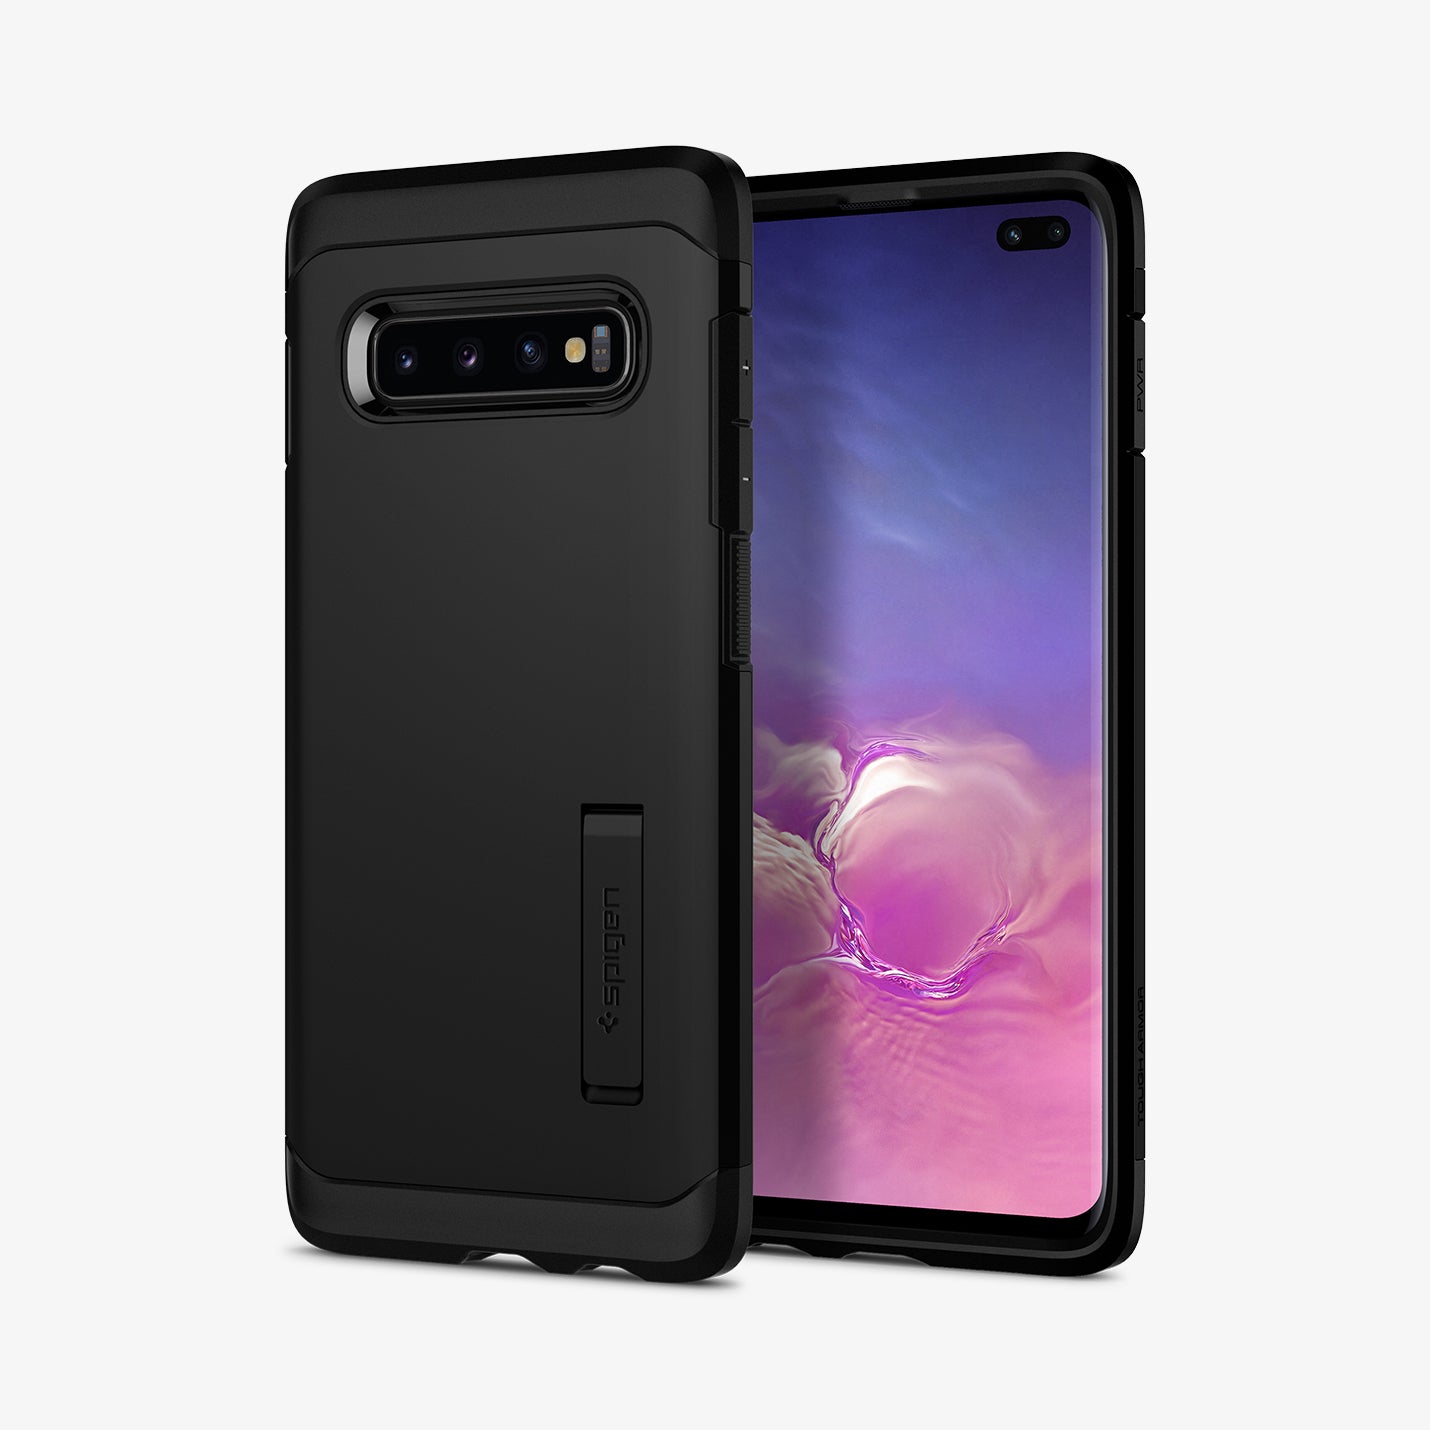 606CS25770 - Galaxy S10 Plus Tough Armor Case in black showing the back and front